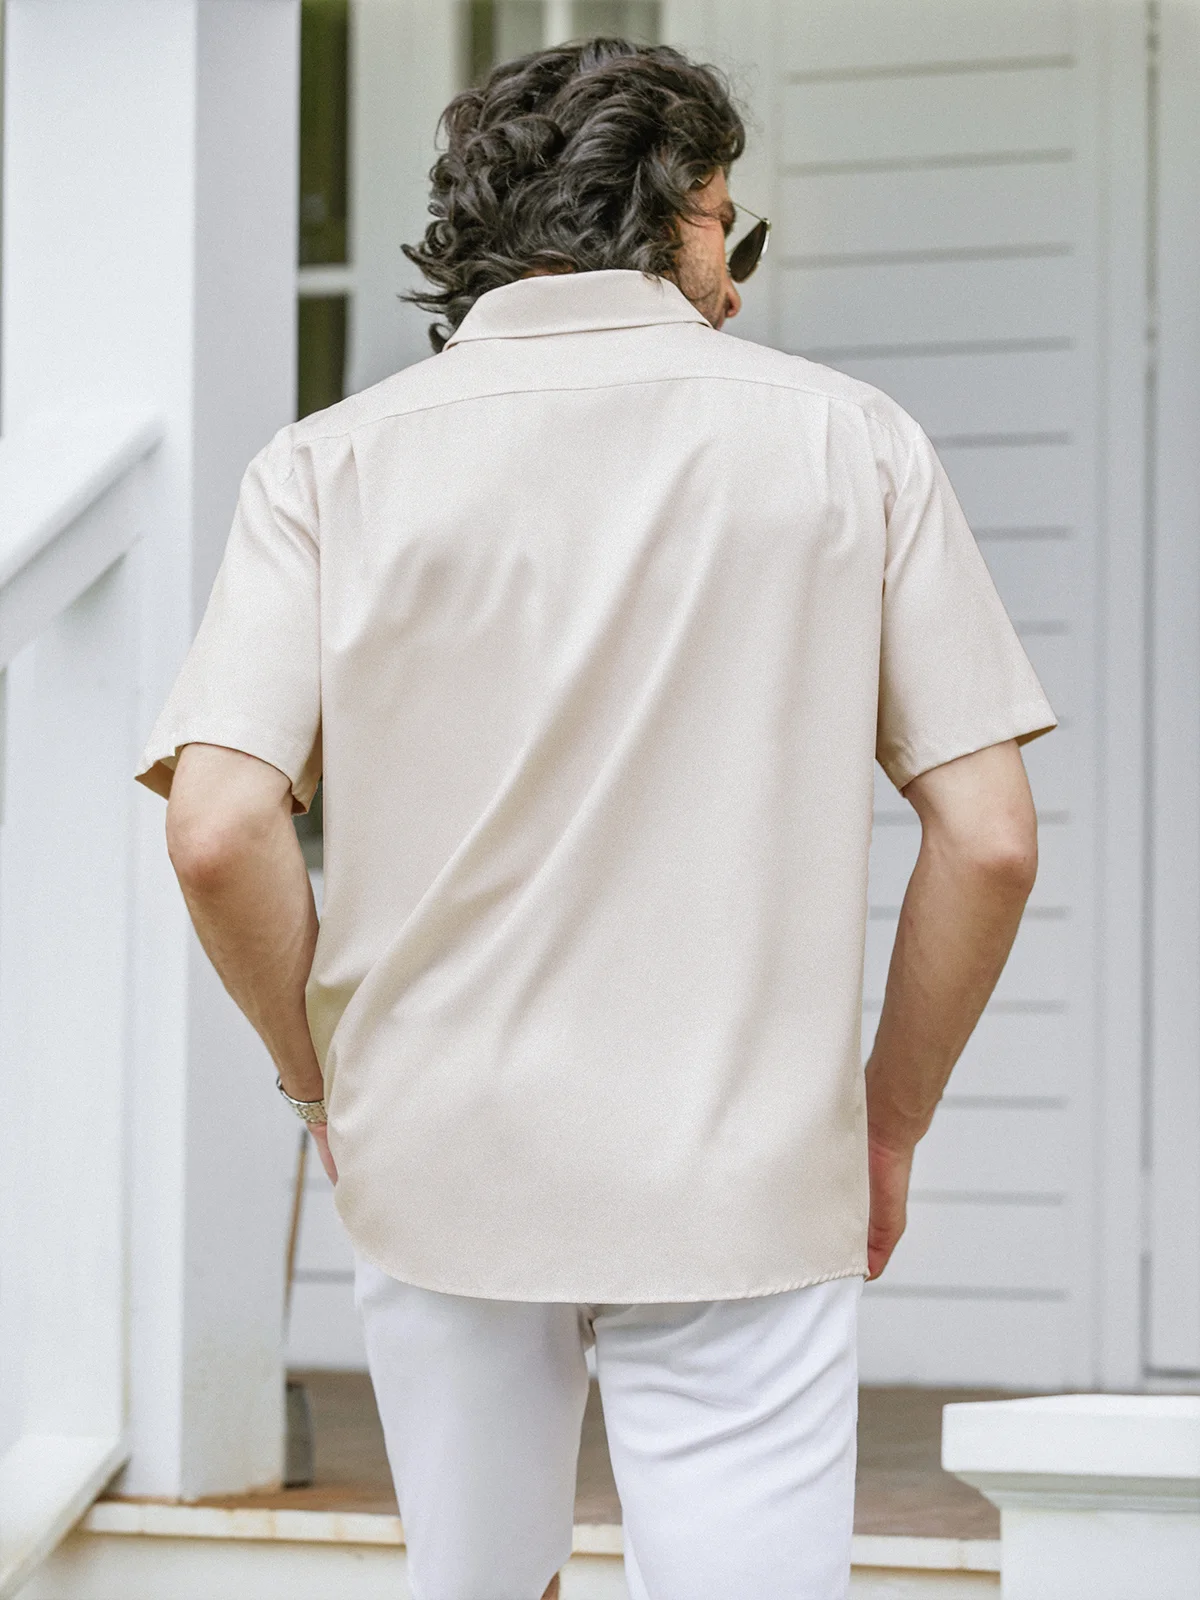 Hardaddy Moisture-wicking Toucan Chest Pocket Bowling Shirt